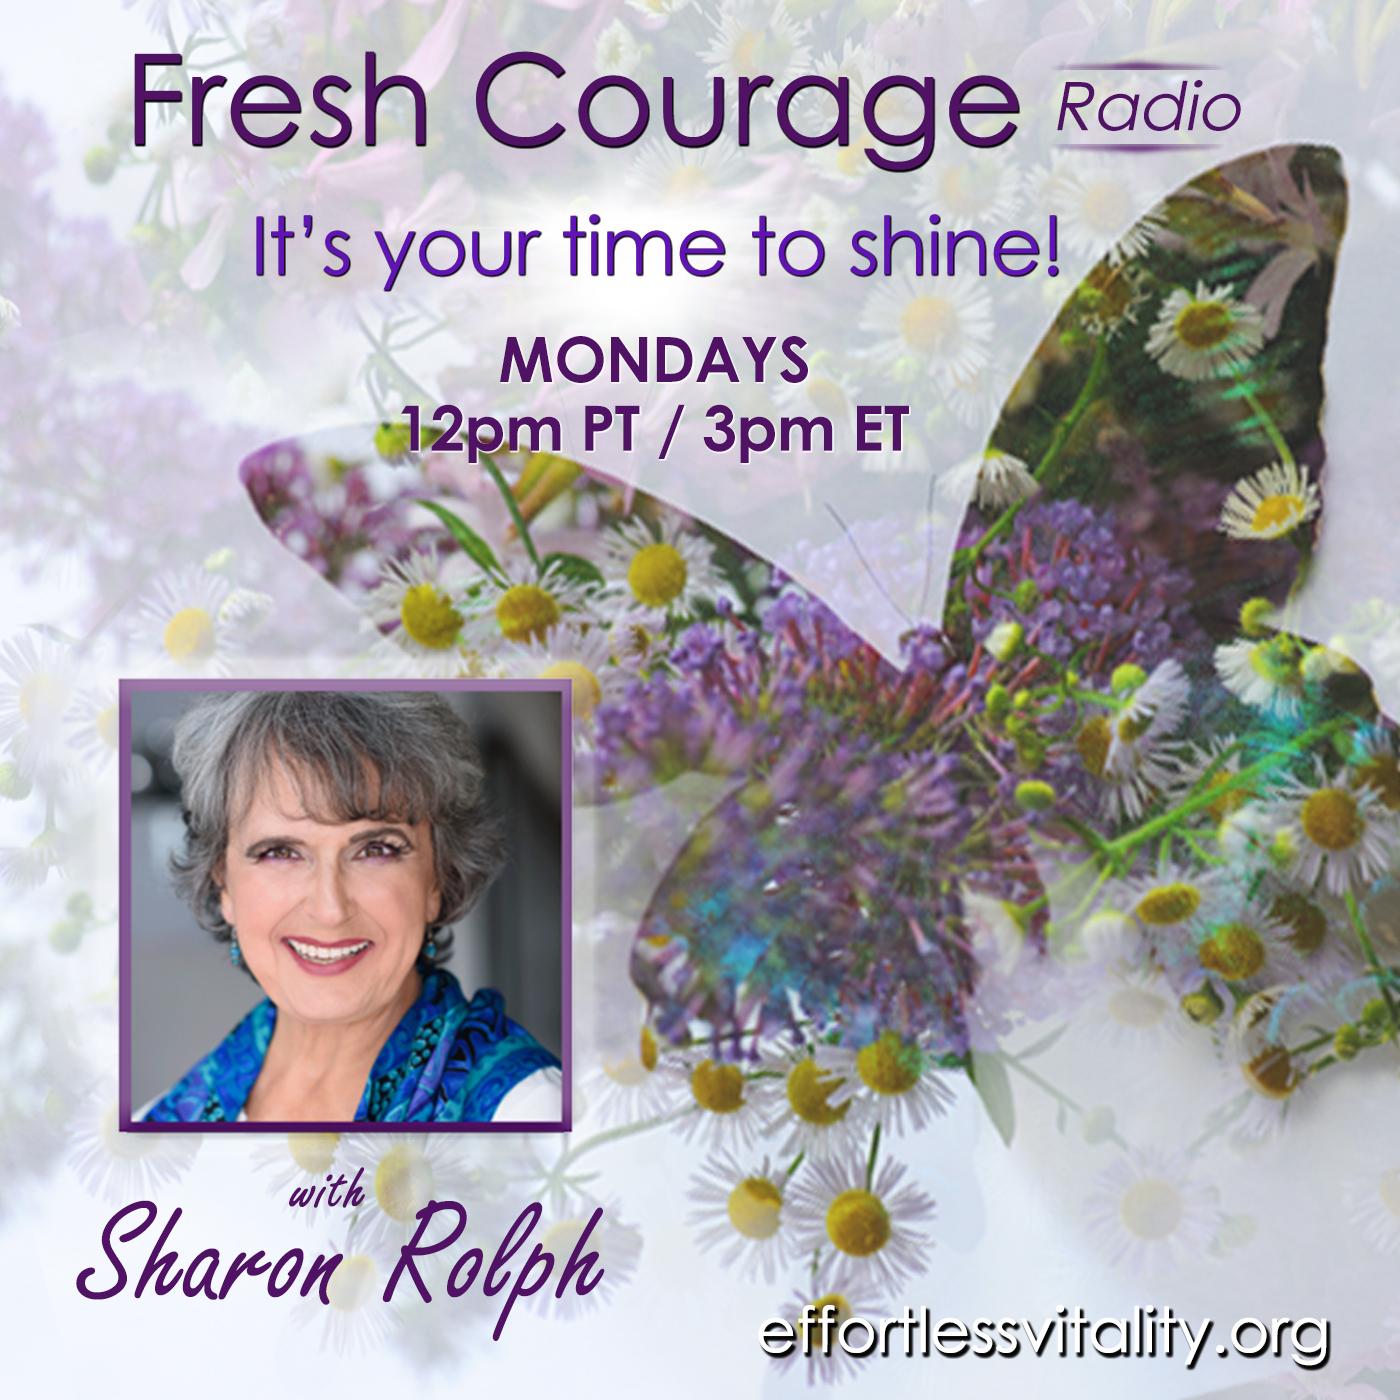 Fresh Courage Radio: It's your time to shine! with Sharon Rolph